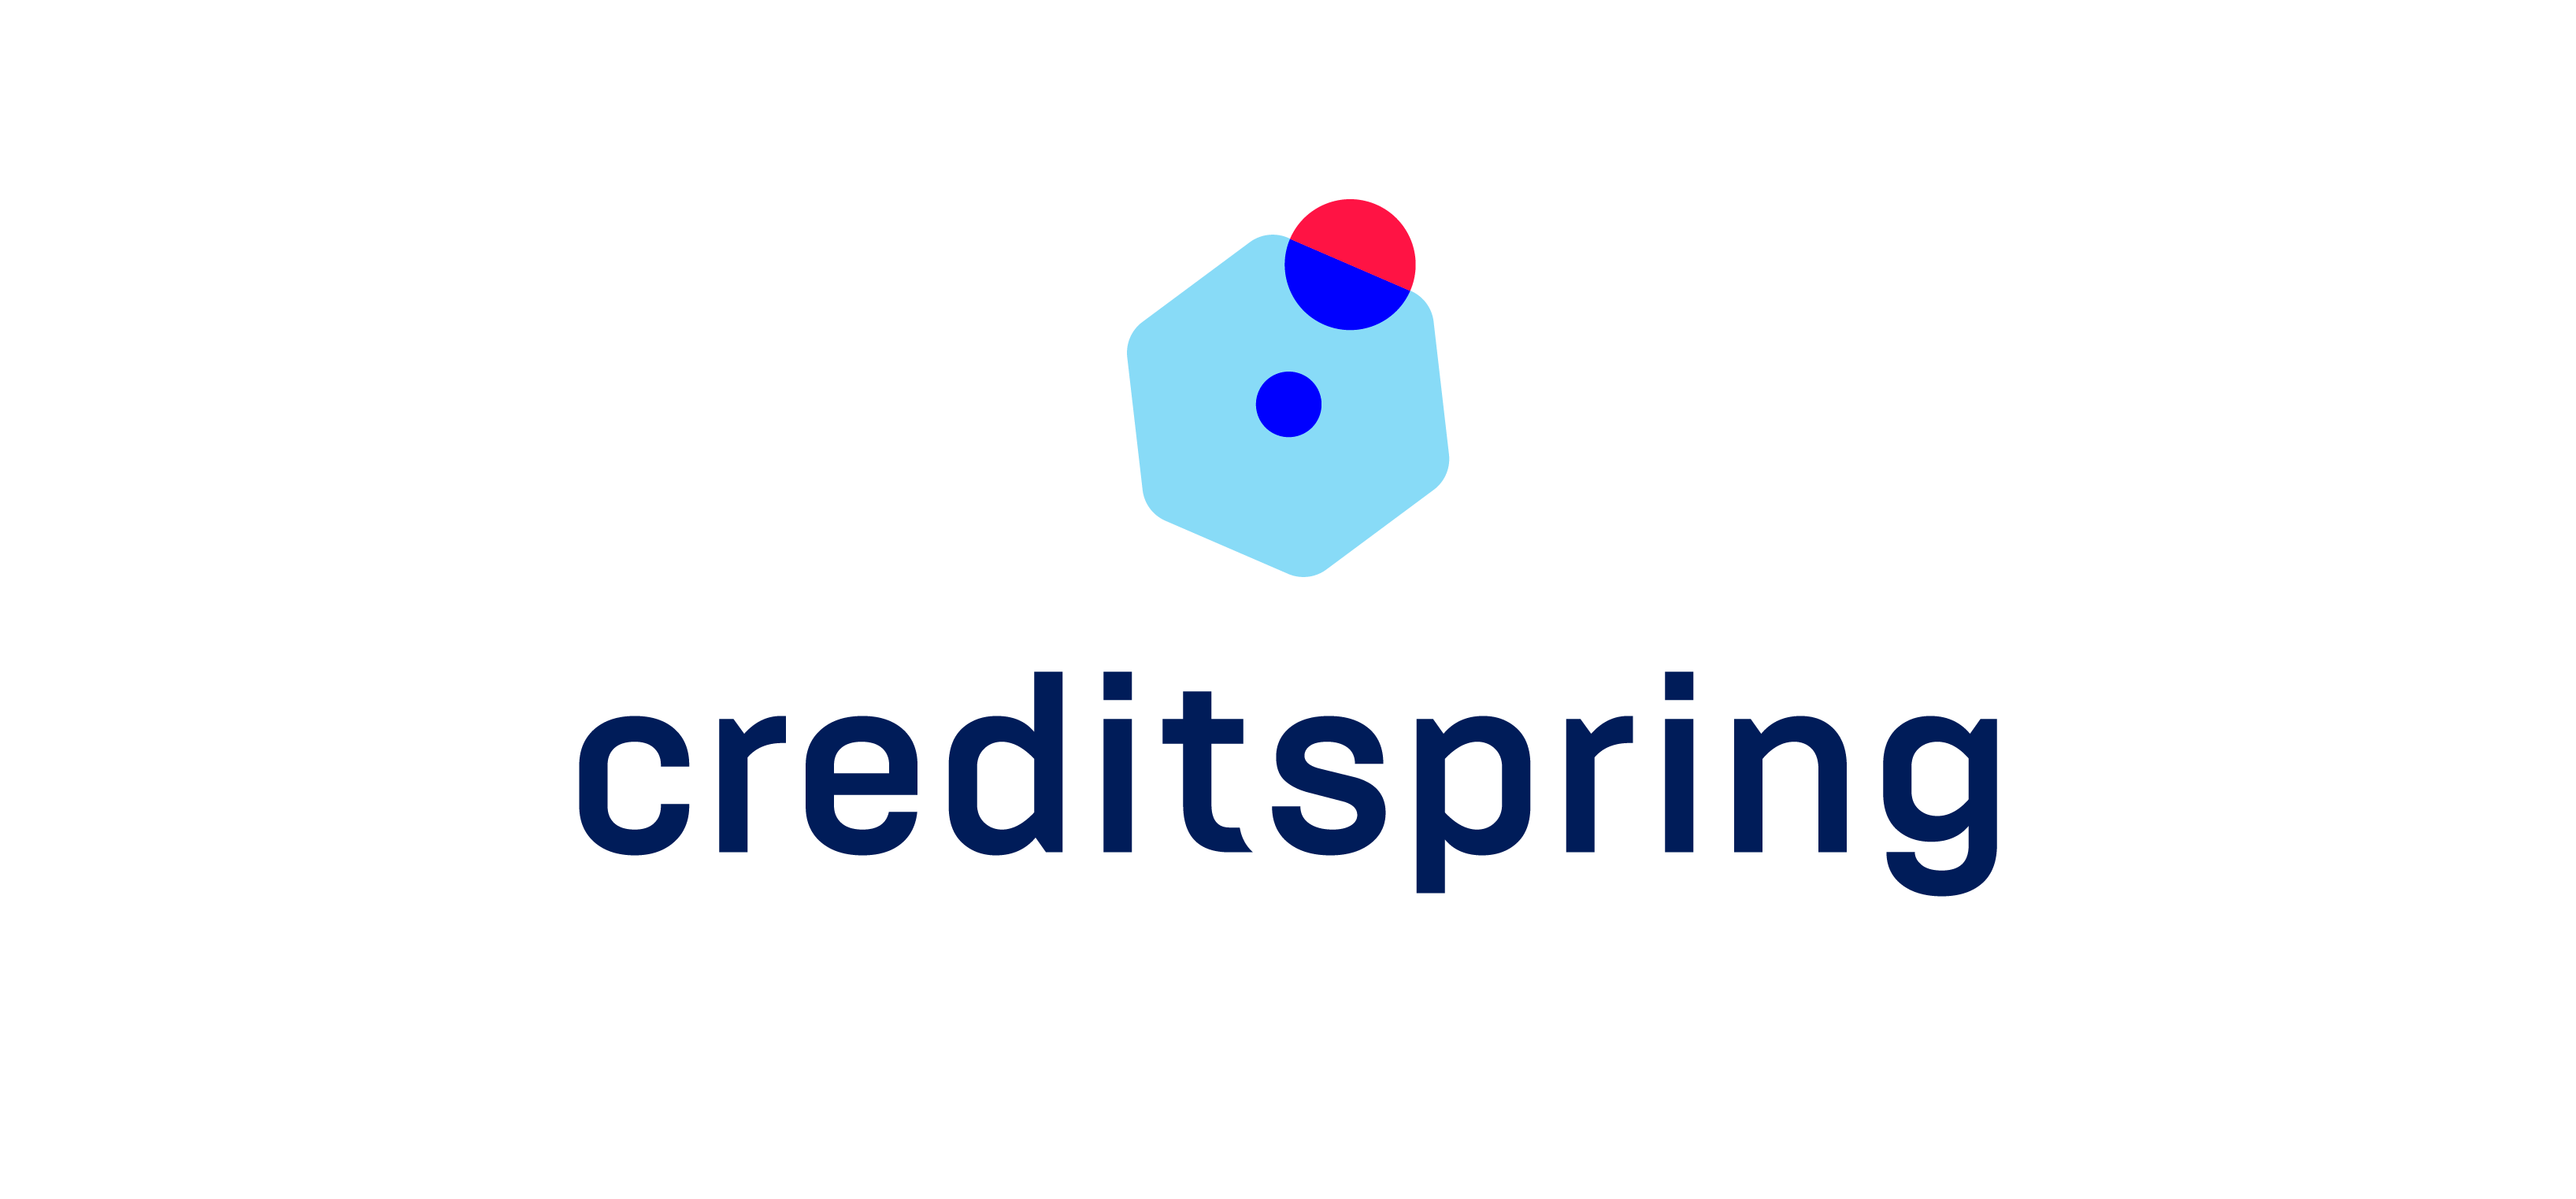 Creditspring hits Key Customer Milestone as UK Consumers Seek Support to Manage Finances